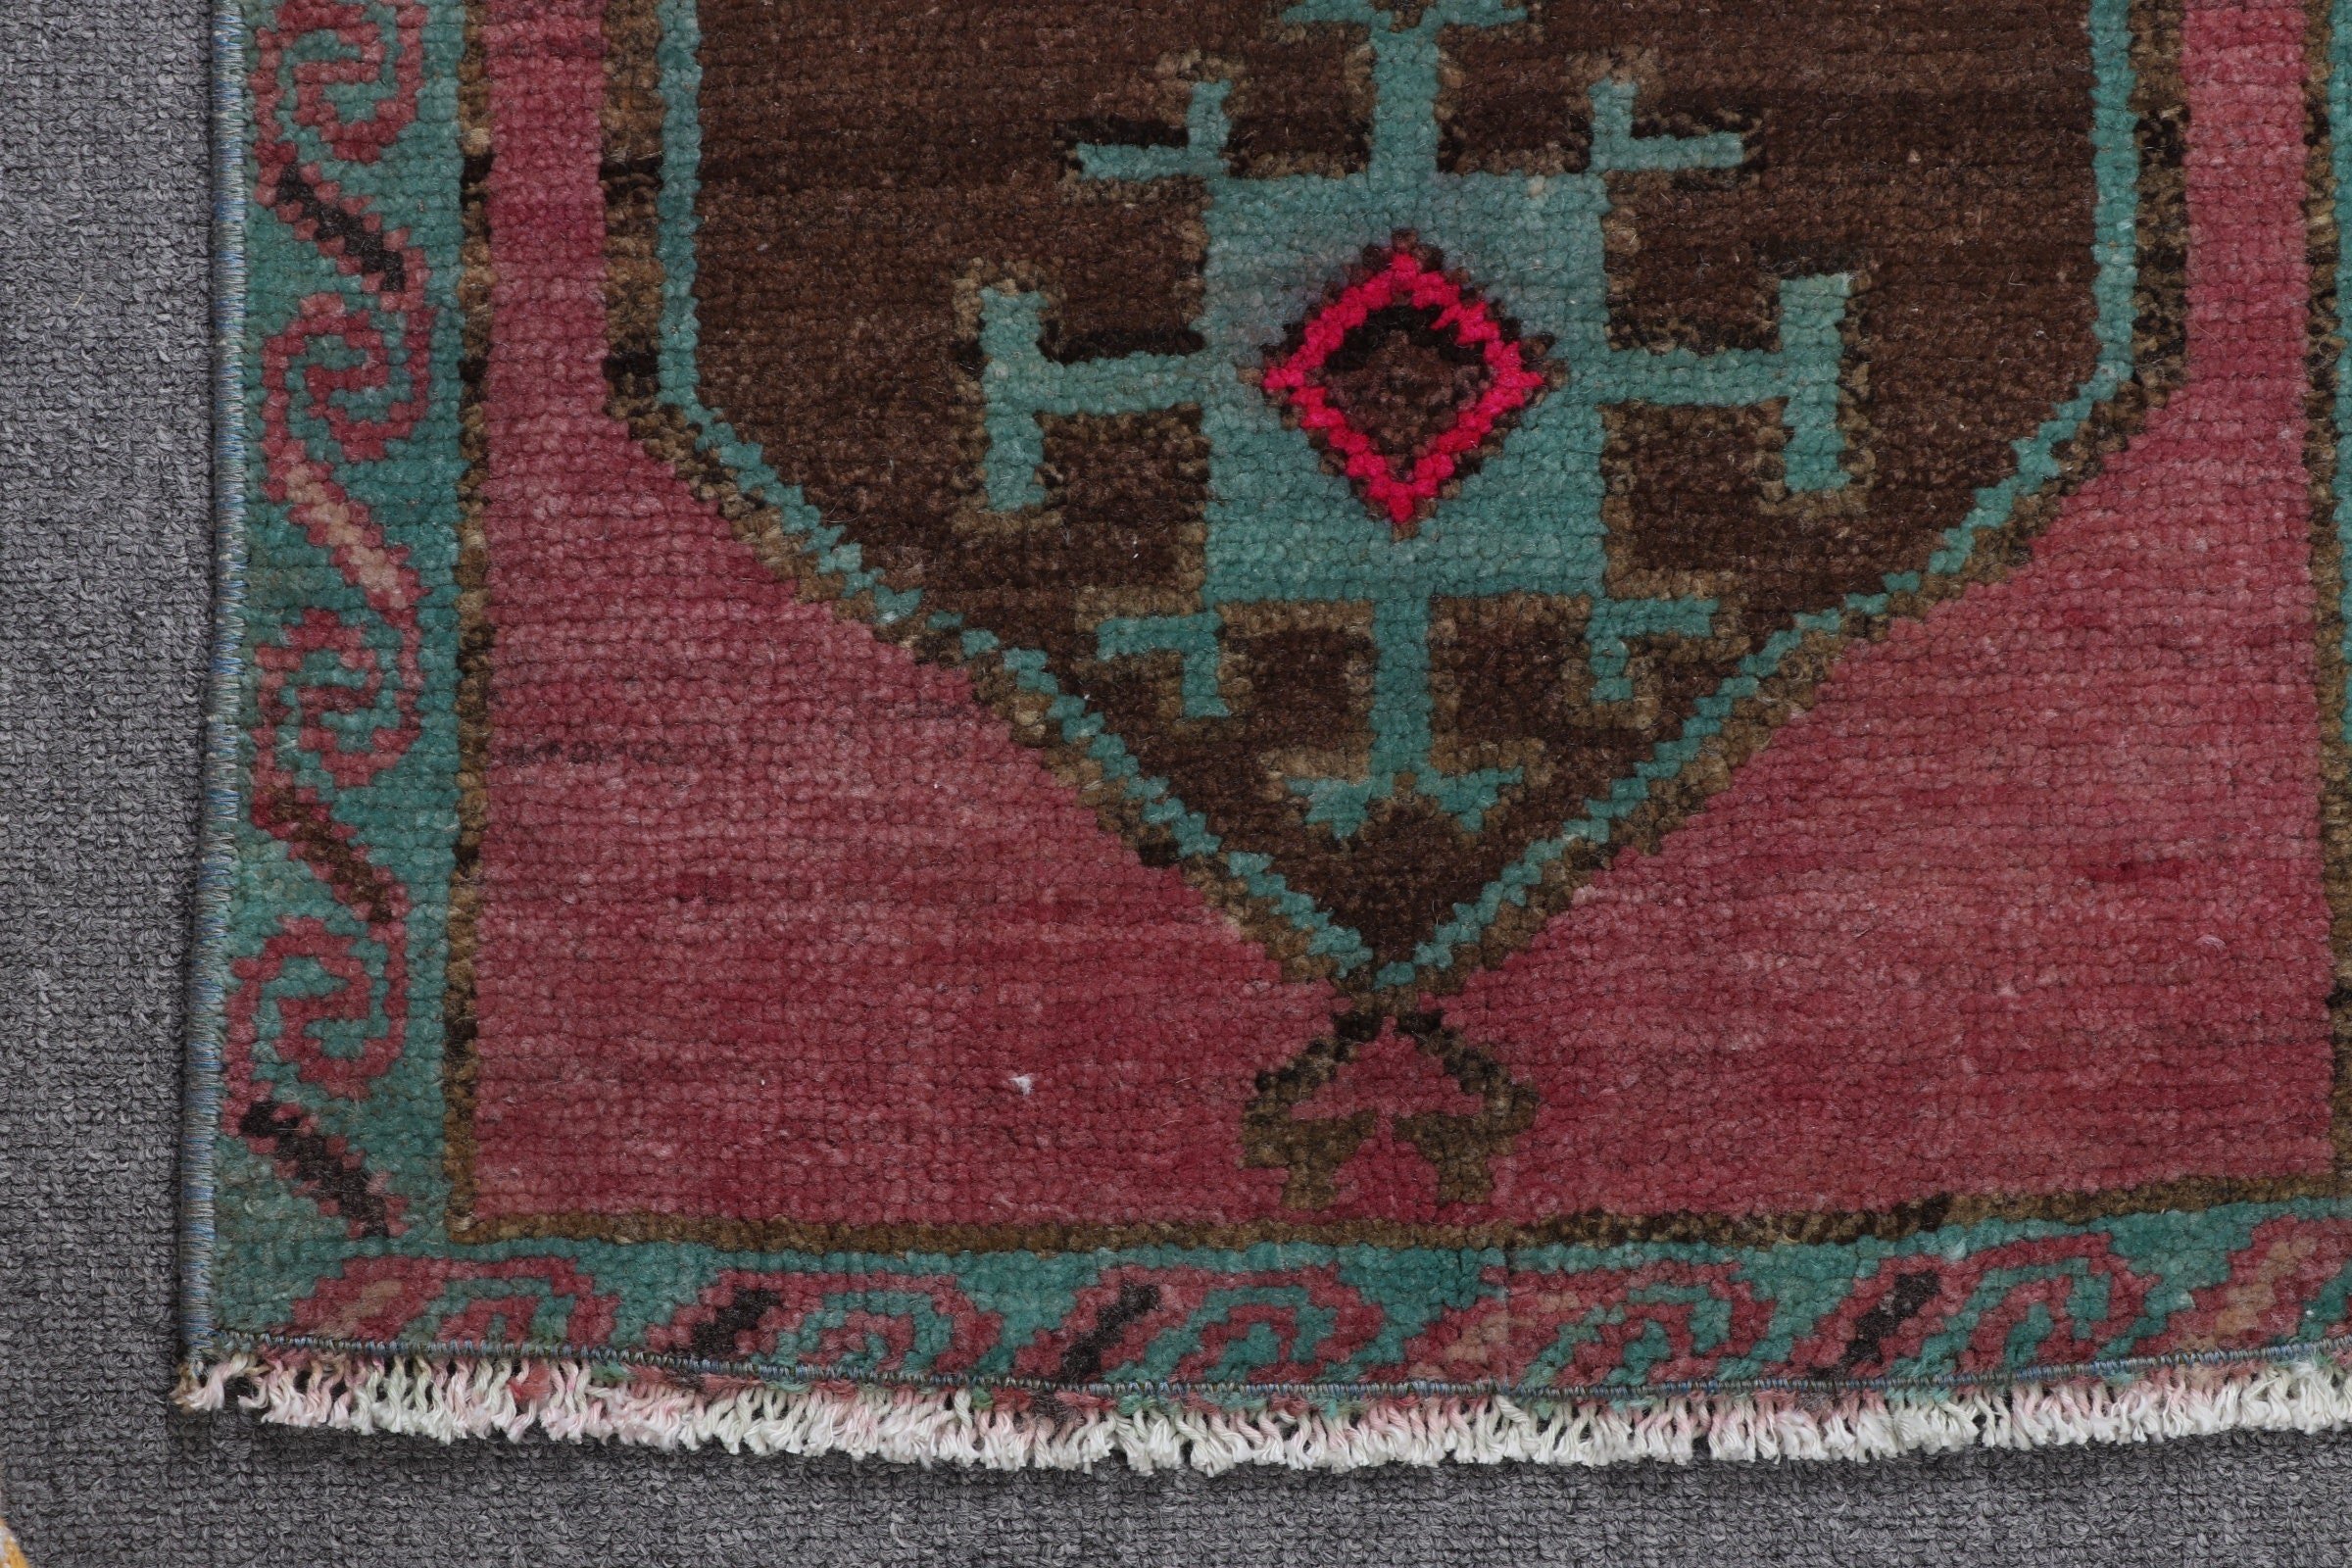 Turkish Rug, 1.5x2.8 ft Small Rug, Bath Rug, Home Decor Rugs, Kitchen Rug, Vintage Rugs, Rugs for Kitchen, Brown Floor Rugs, Bedroom Rugs